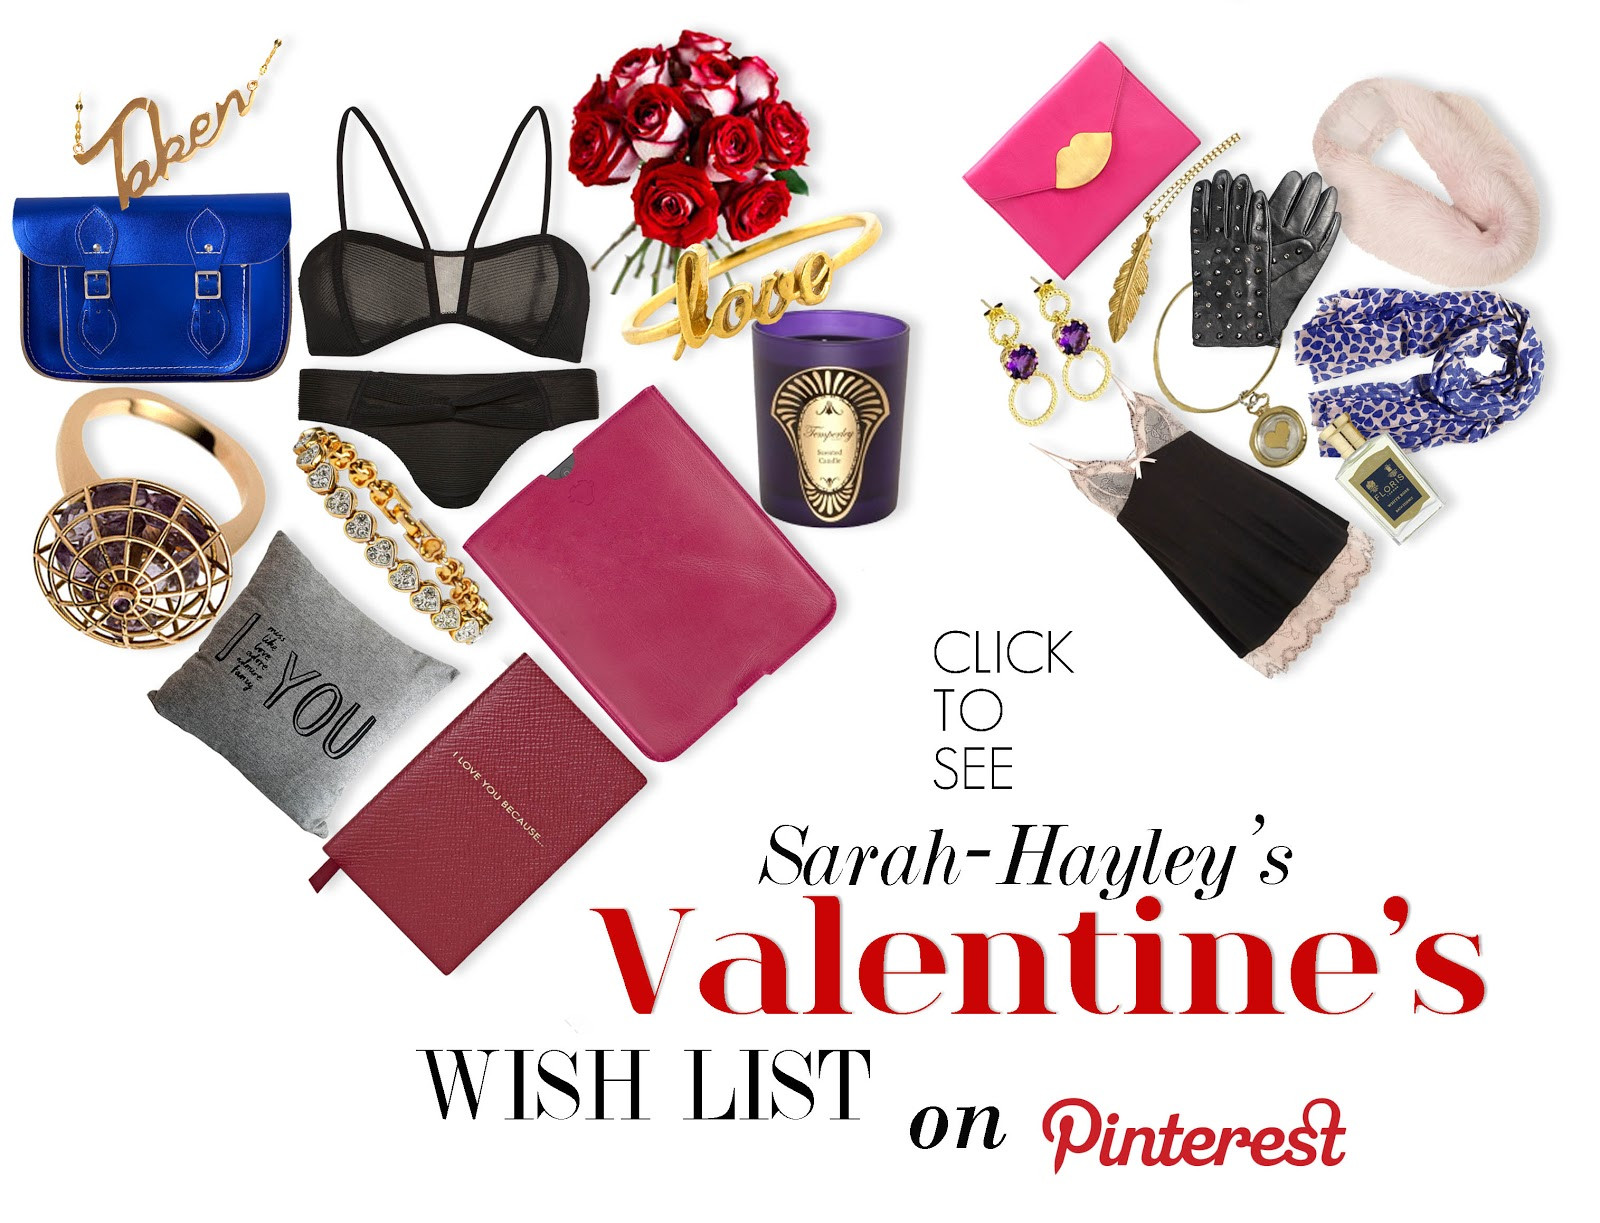 Be My Valentine Gift Ideas
 See My Valentines Day Gift Ideas on Pinterest by Sarah